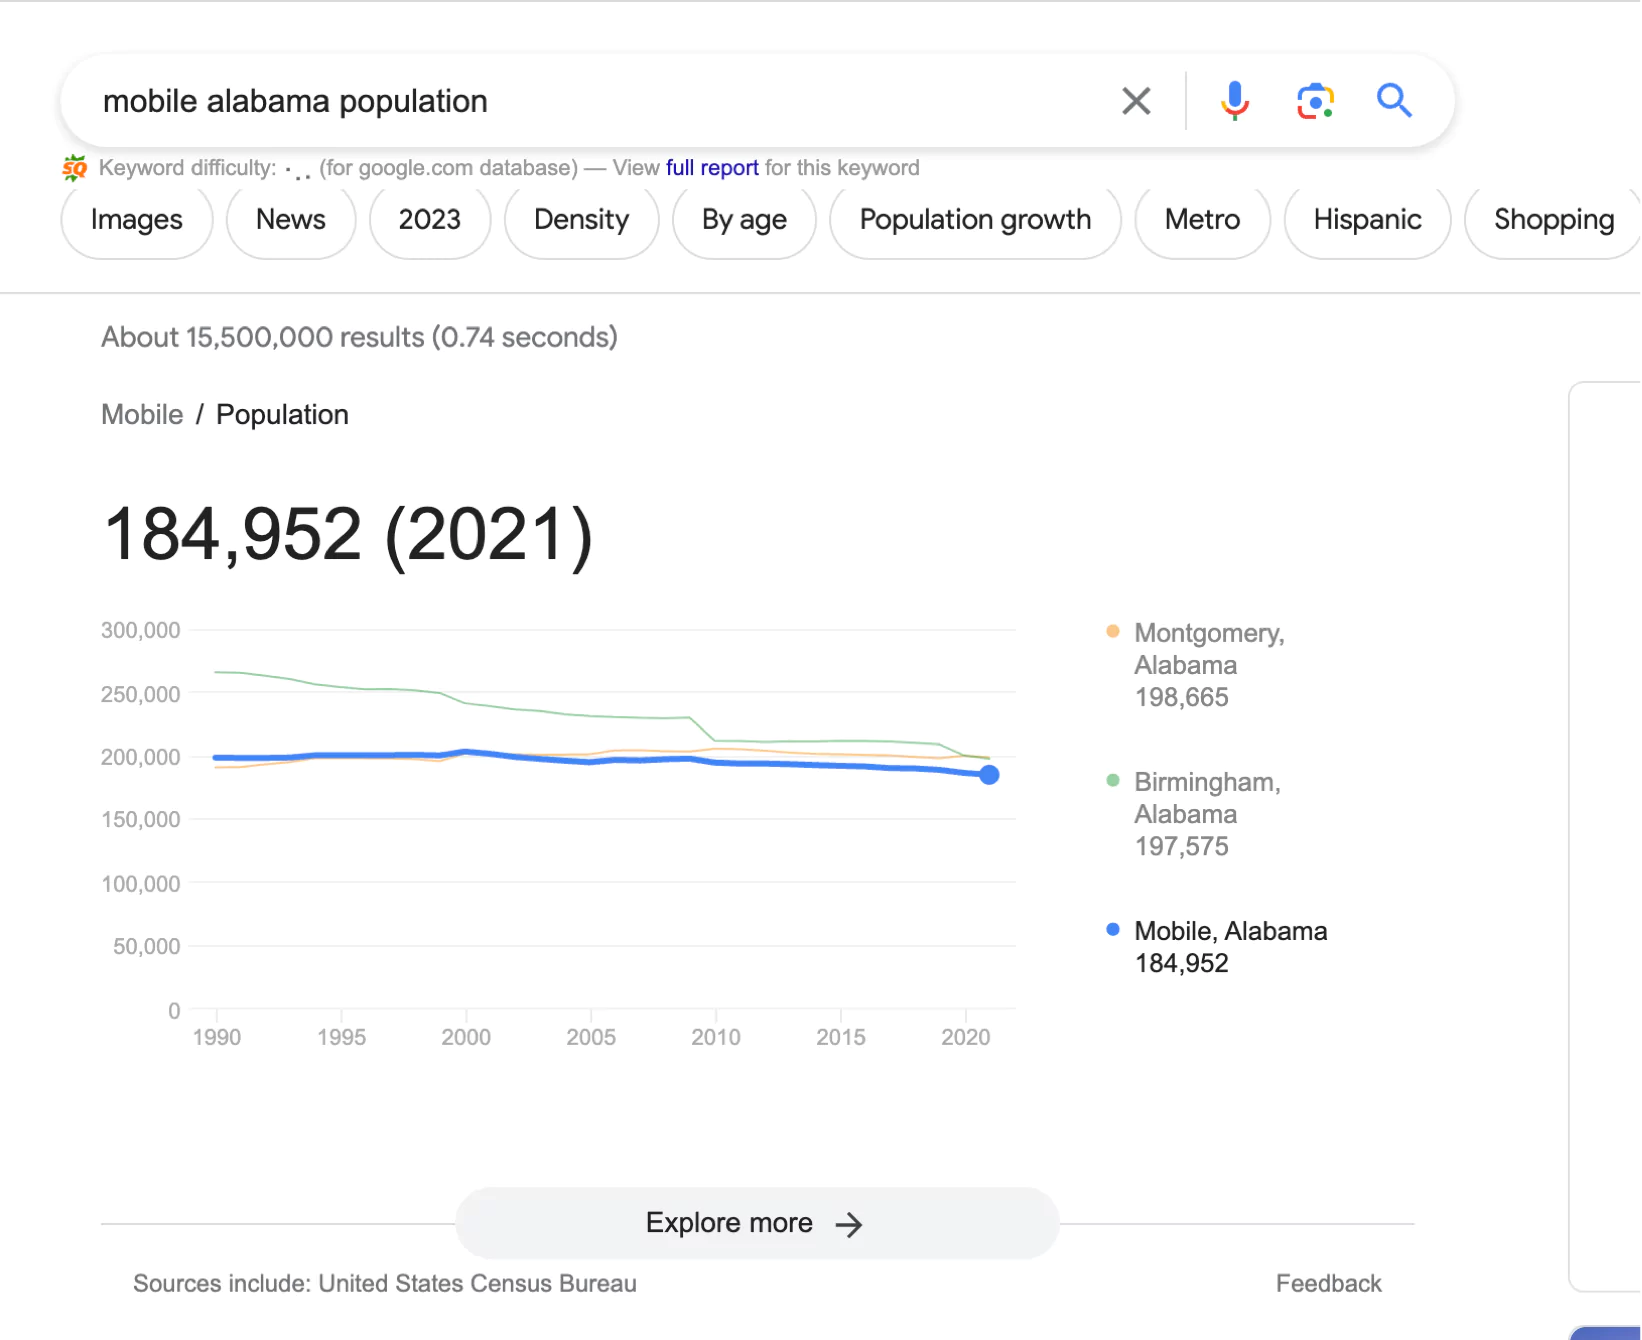 figure out the population size